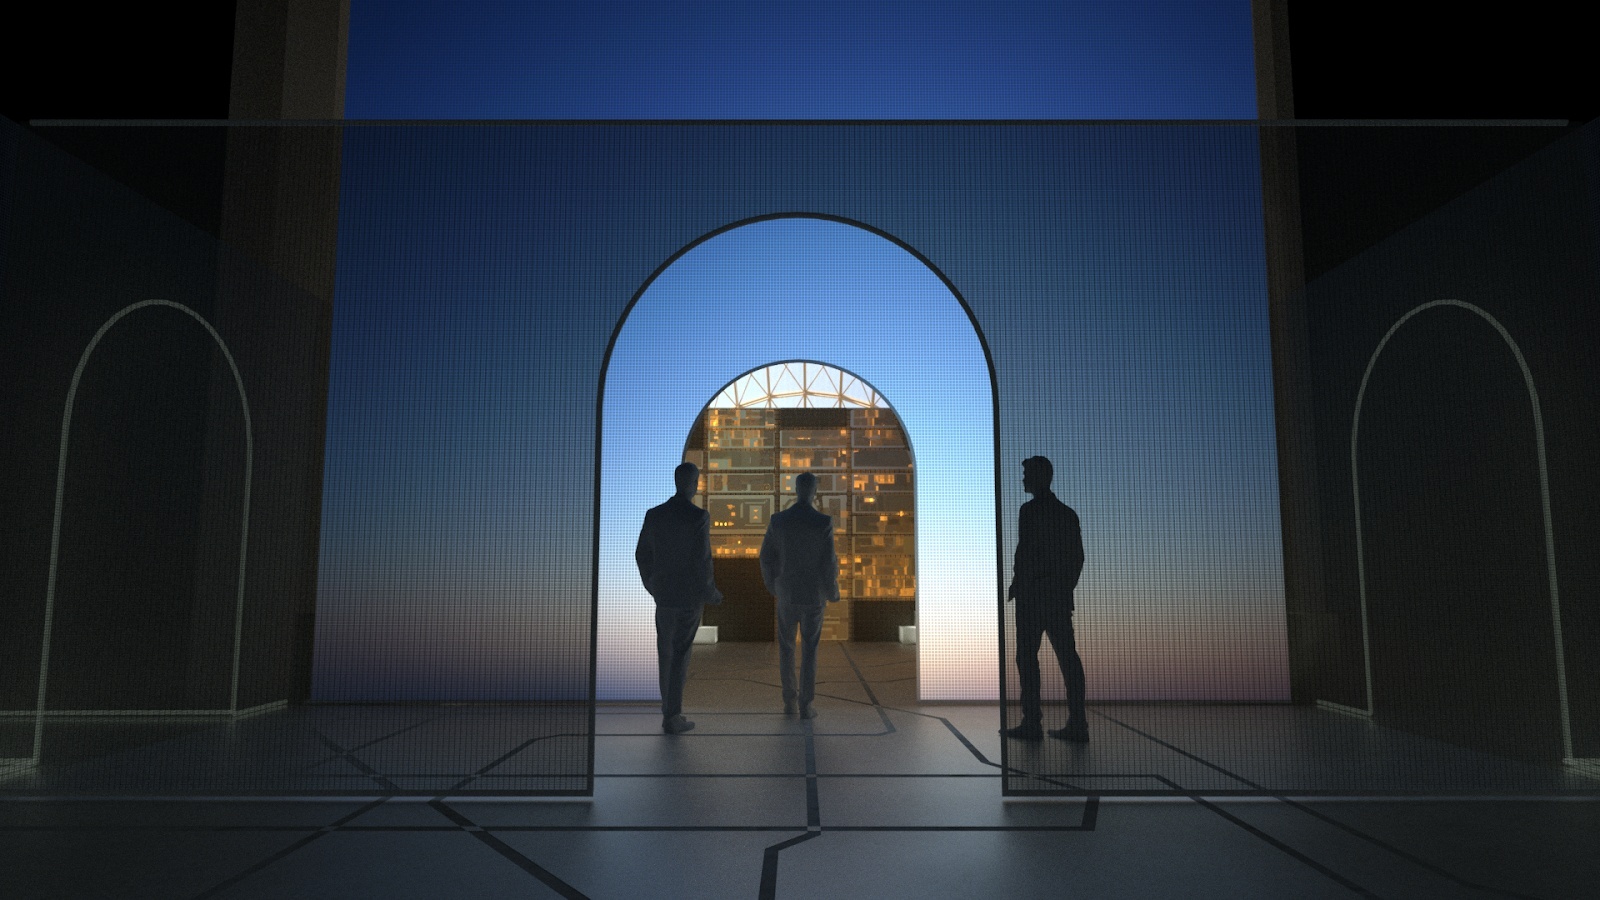 Render of people standing in dark space, with single archway scrim illuminated, with map in background.